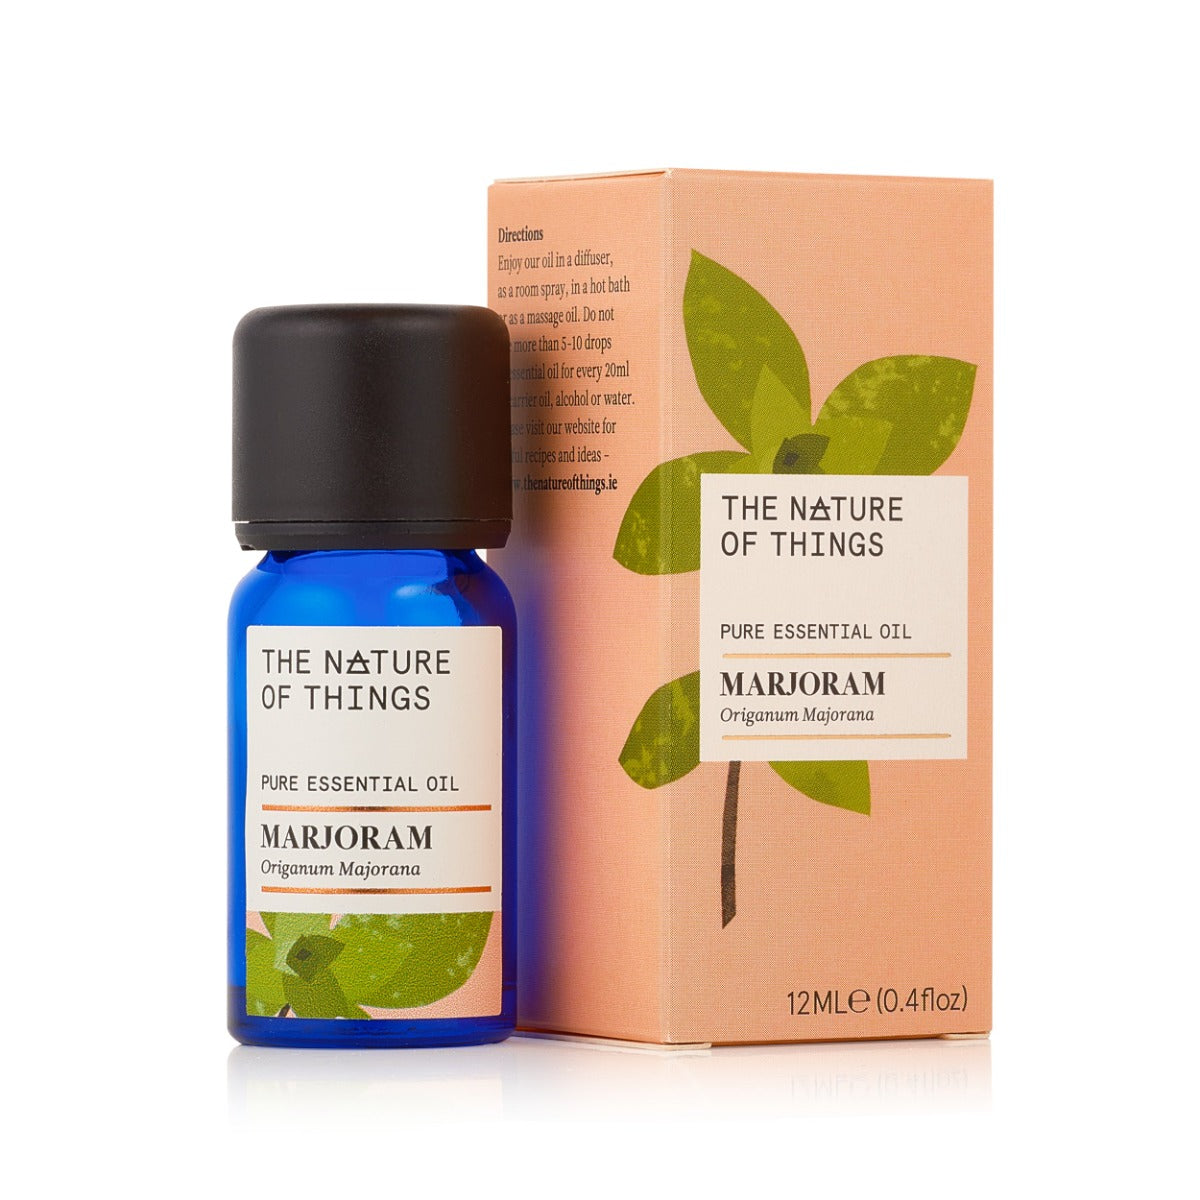 Organic Marjoram Essential Oil from The Nature of Things